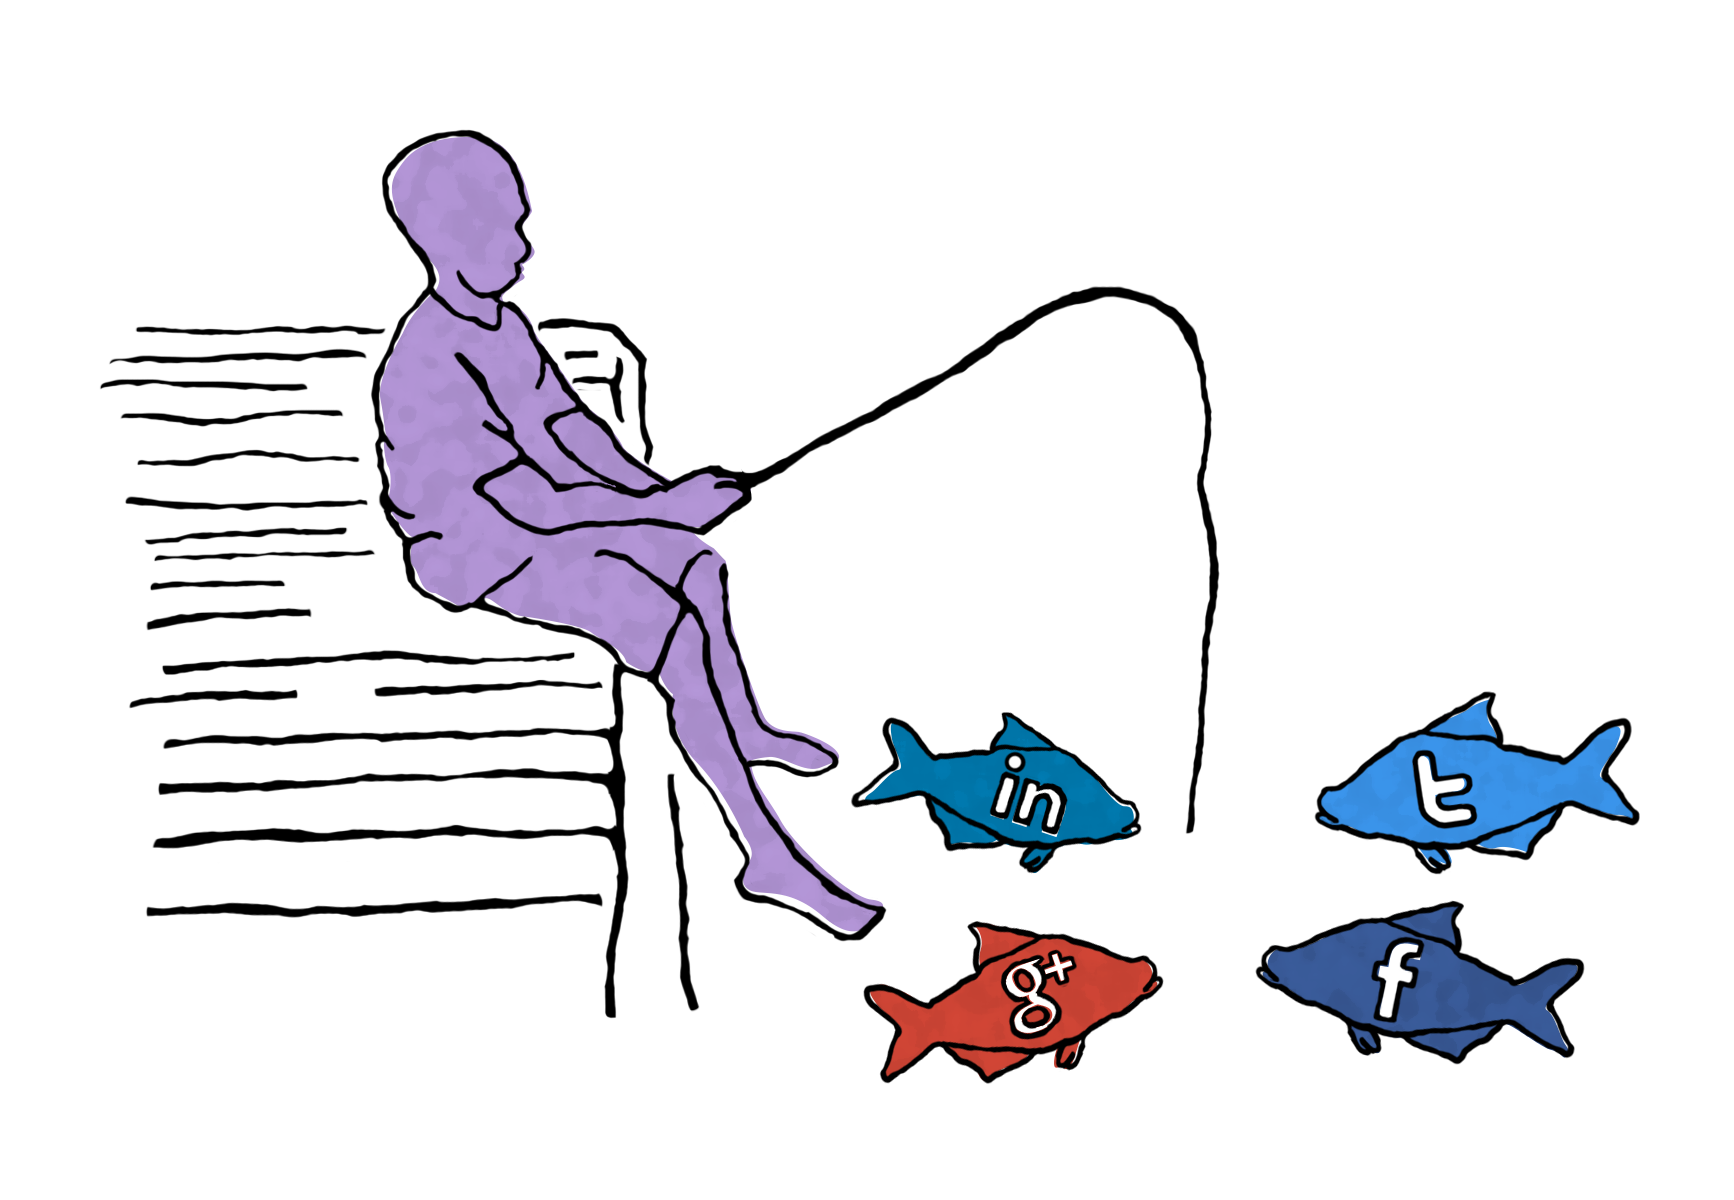 Illustration of someone fishing, with each fish branded with social media site logos.